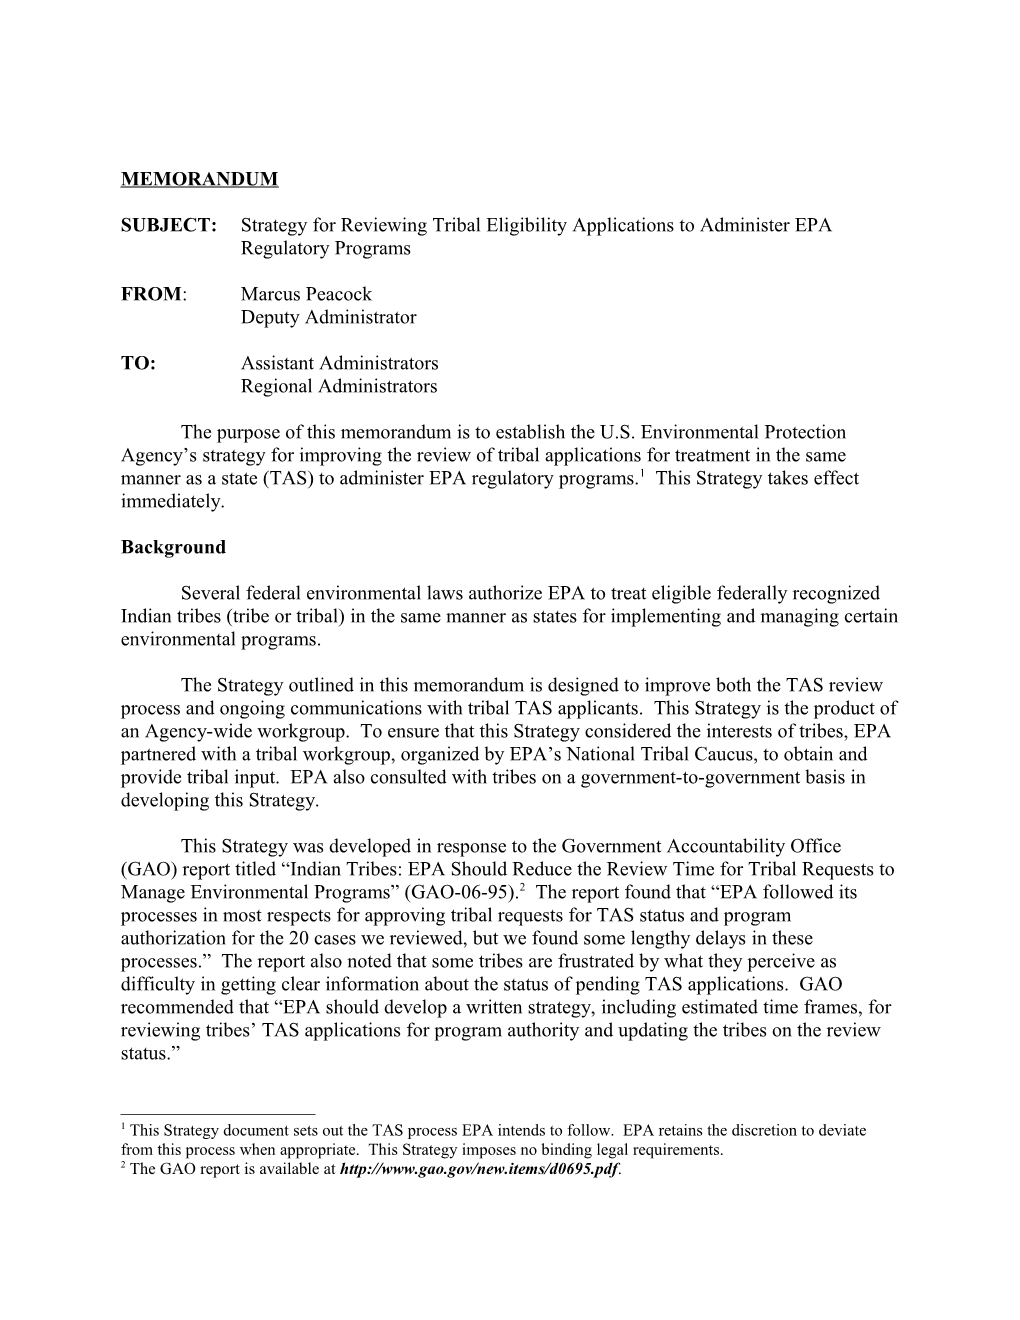 SUBJECT:Strategy for Reviewing Tribal Eligibility Applications to Administer Eparegulatory